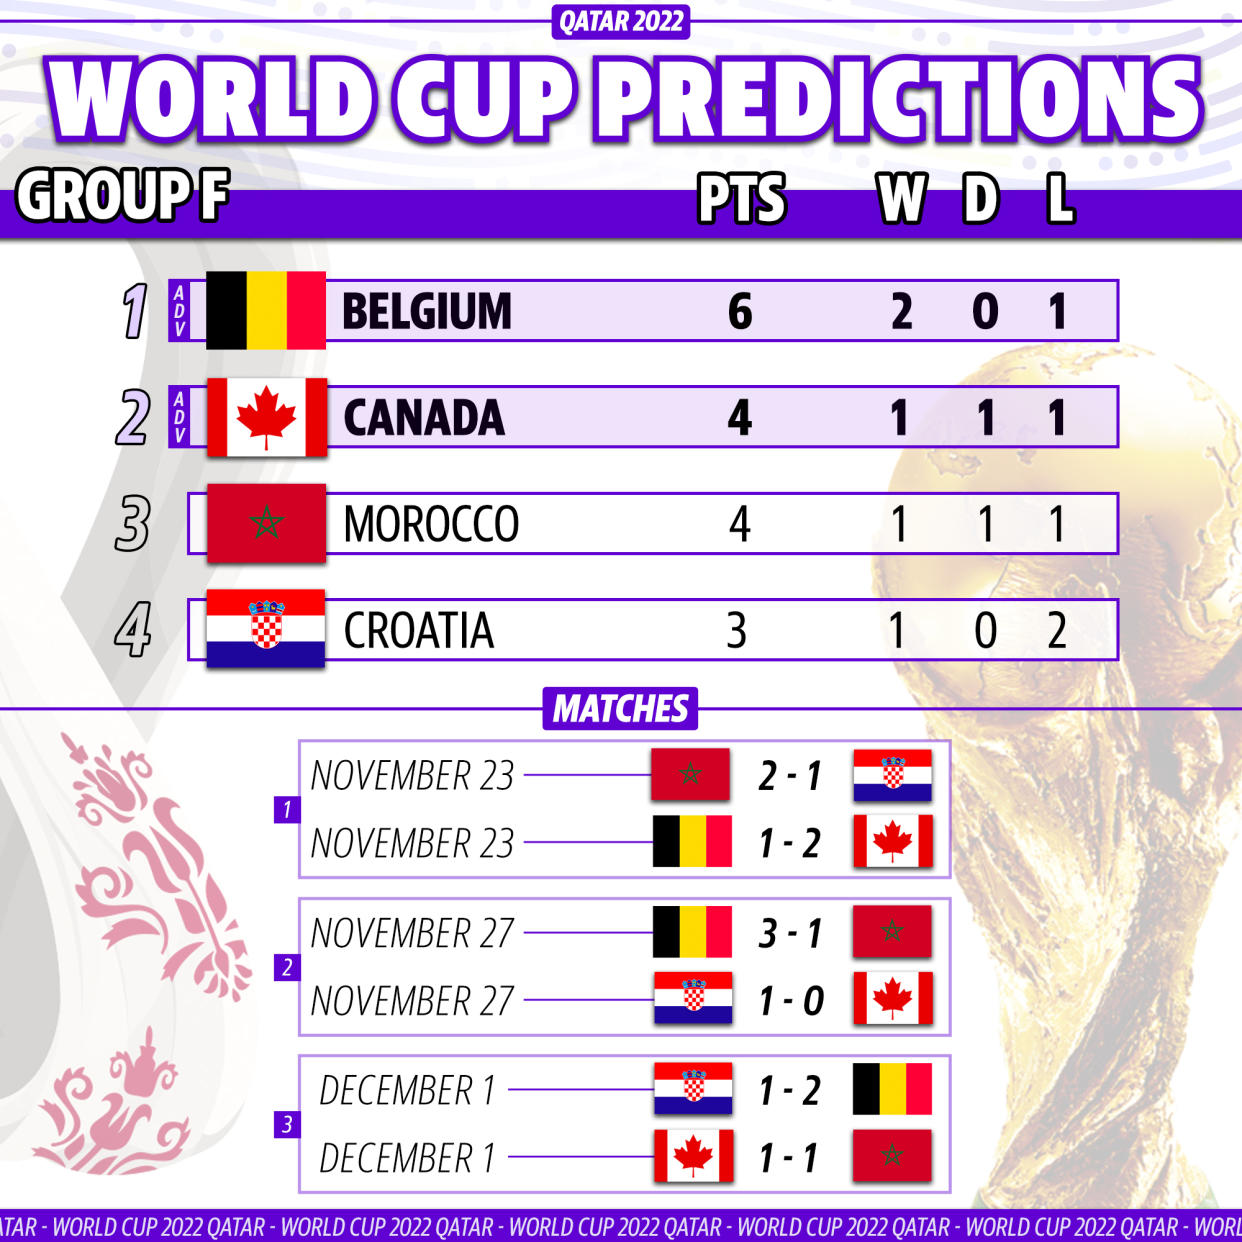 Yahoo Sports soccer writer Henry Bushnell's prediction for how Group F plays out at the 2022 World Cup. (Graphic by Michael Wagstaffe/Yahoo Sports)